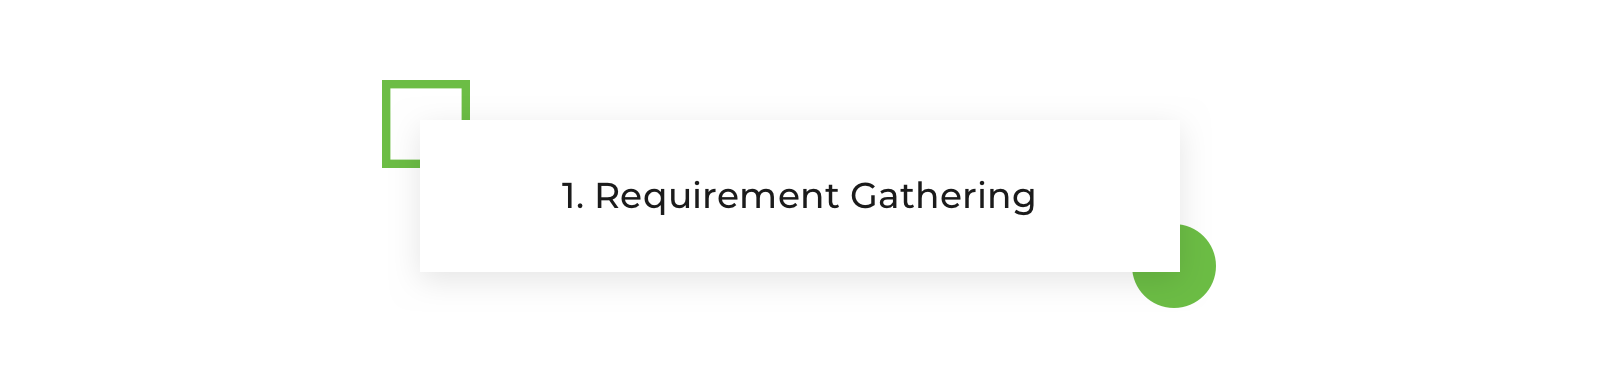 Requirements-Gathering